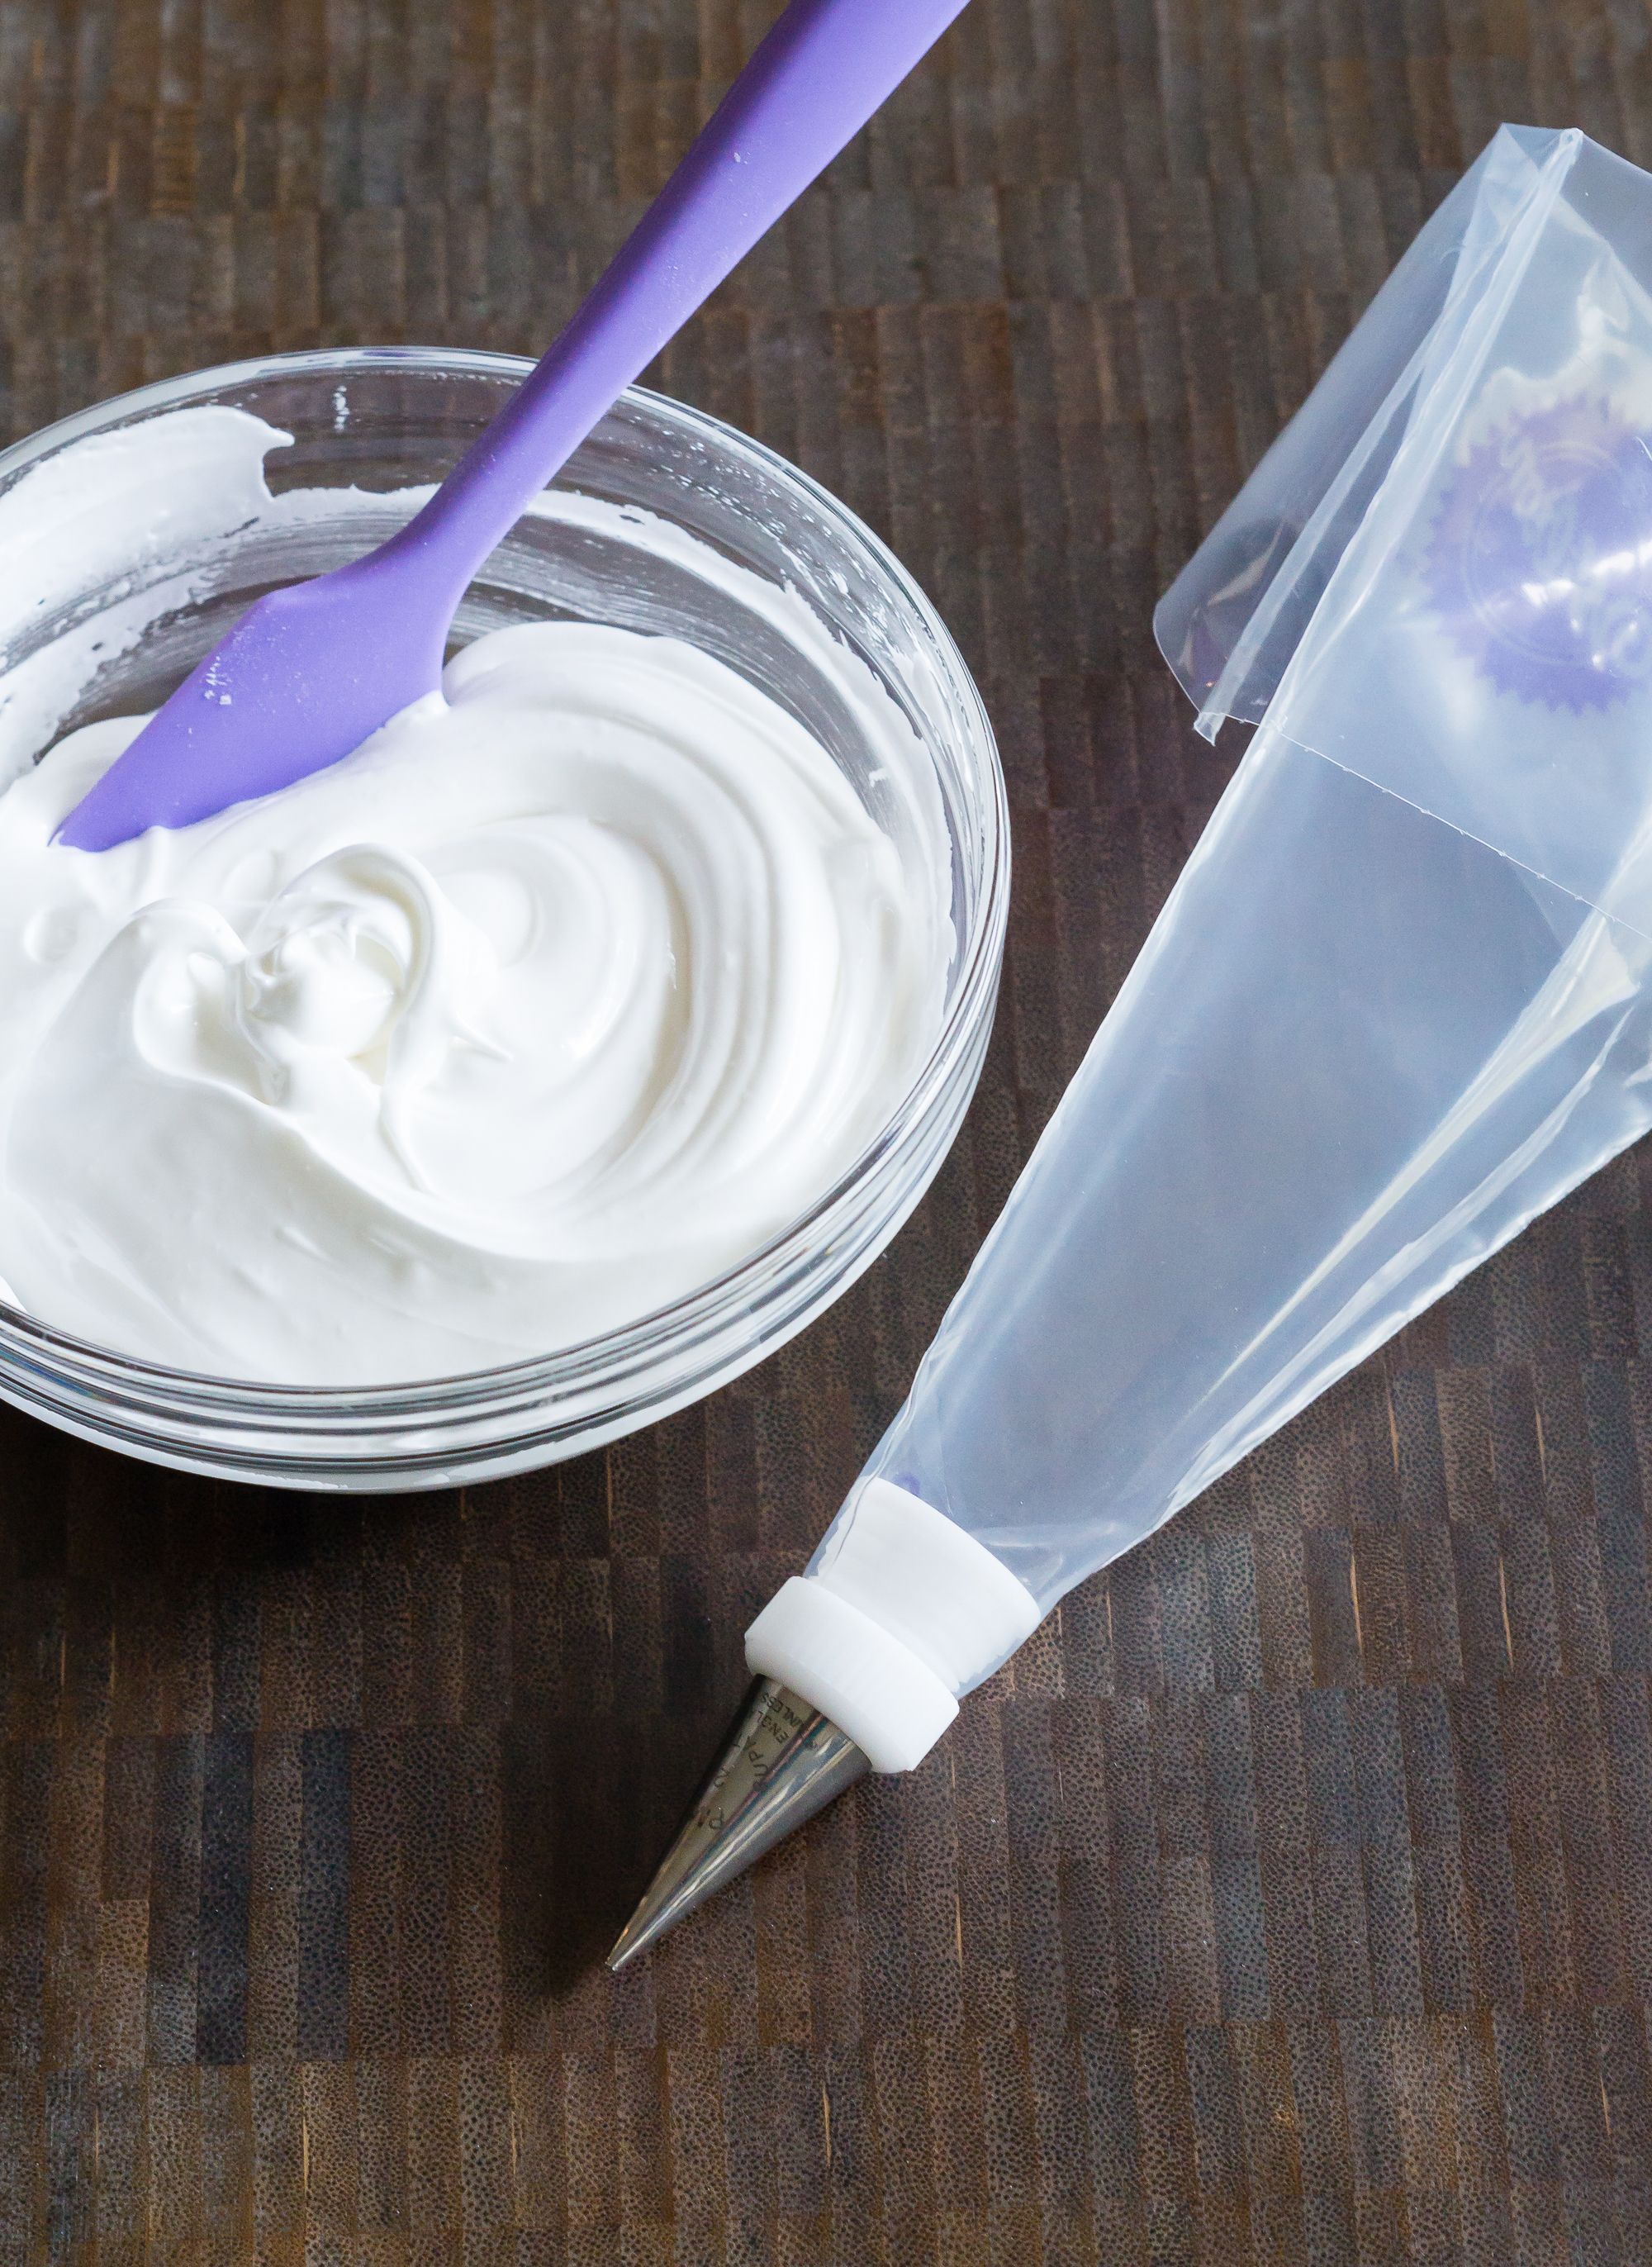 How to Use a Piping Bag